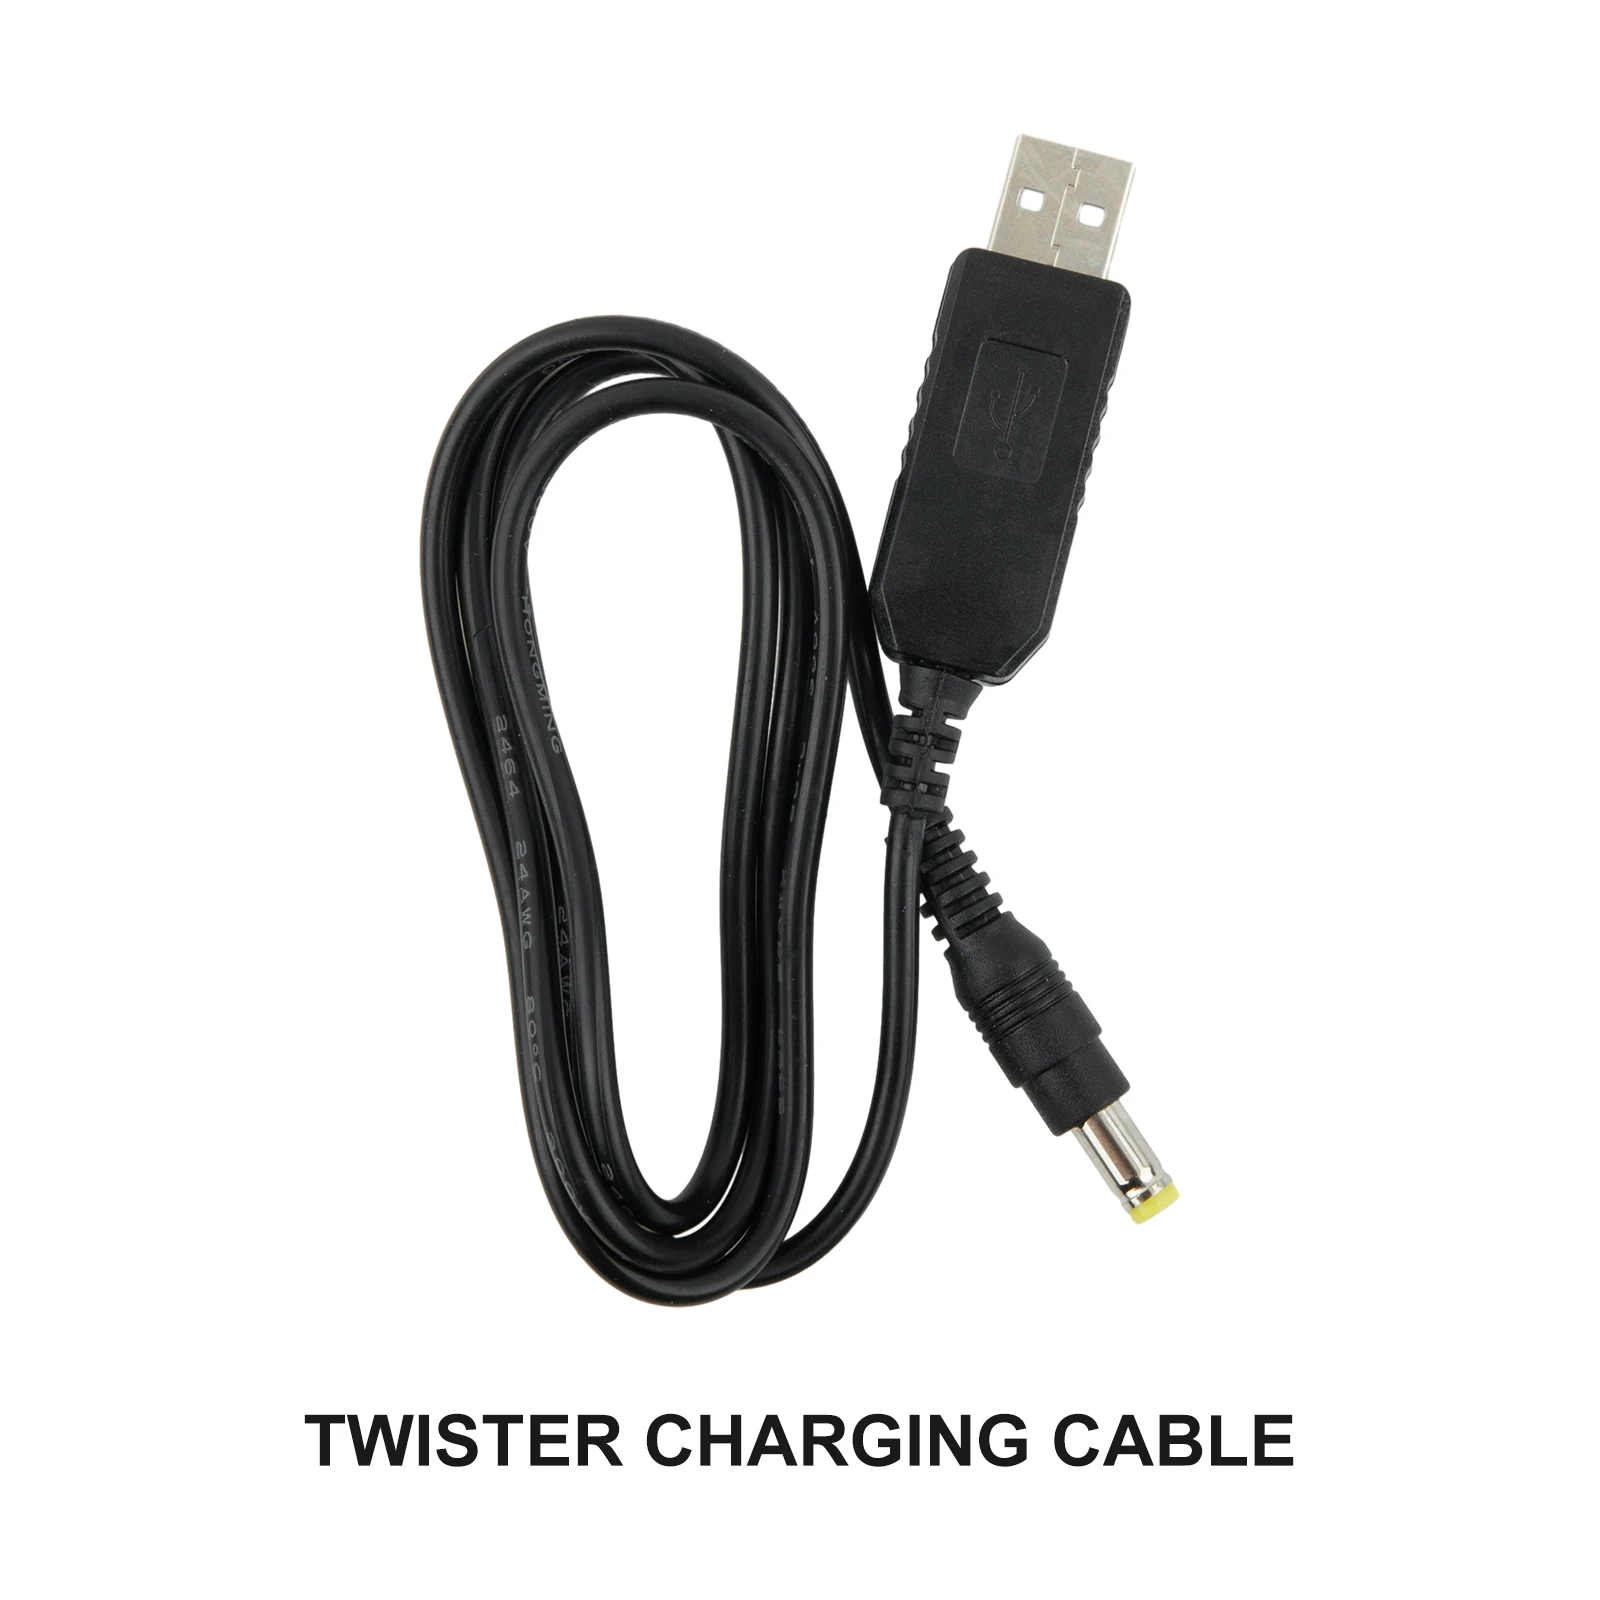 

1pc Cable Only For Twister Car Vacuum Cleaner USB Charging Cable Wire R6053 Cable Socket Charger Lead